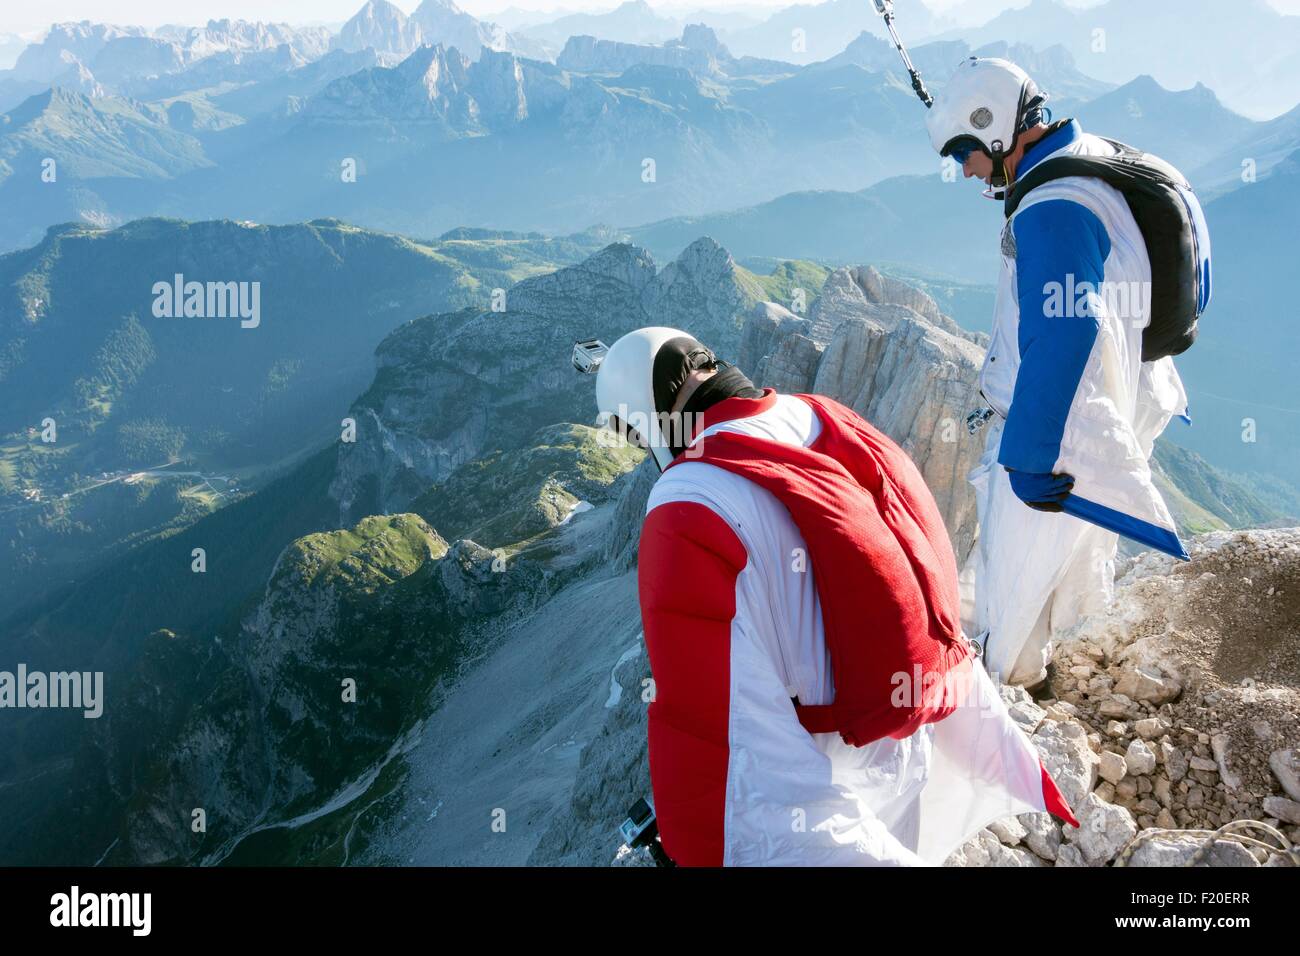 Two male BASE jumpers standing on edge of mountain looking down, Dolomites, Italy Stock Photo